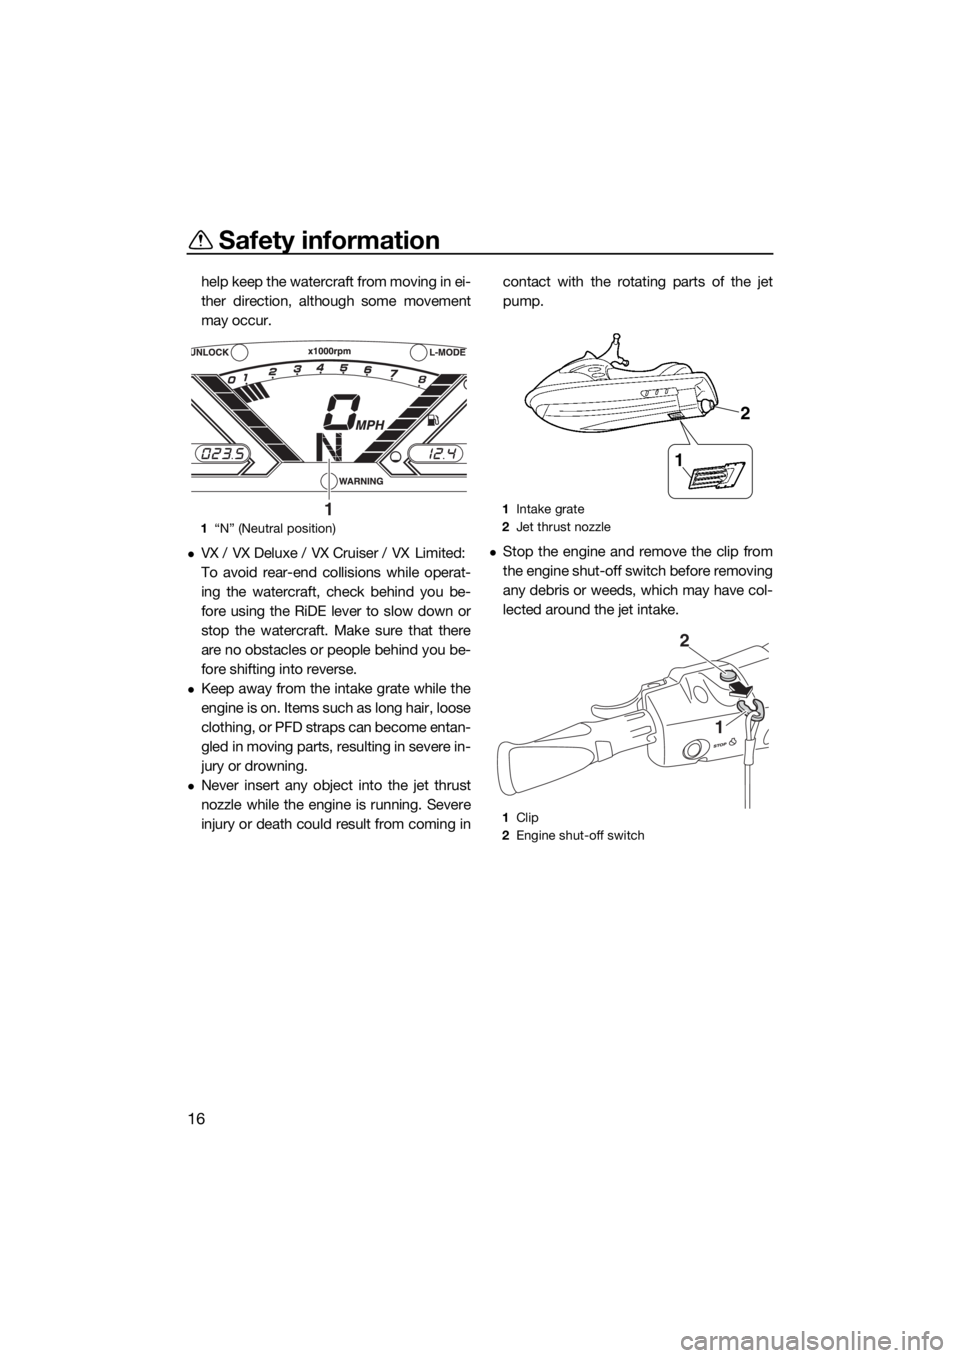 YAMAHA VX 2019  Owners Manual Safety information
16
help keep the watercraft from moving in ei-
ther direction, although some movement
may occur.
VX / VX Deluxe / VX Cruiser / VX Limited: 
To avoid rear-end collisions while ope